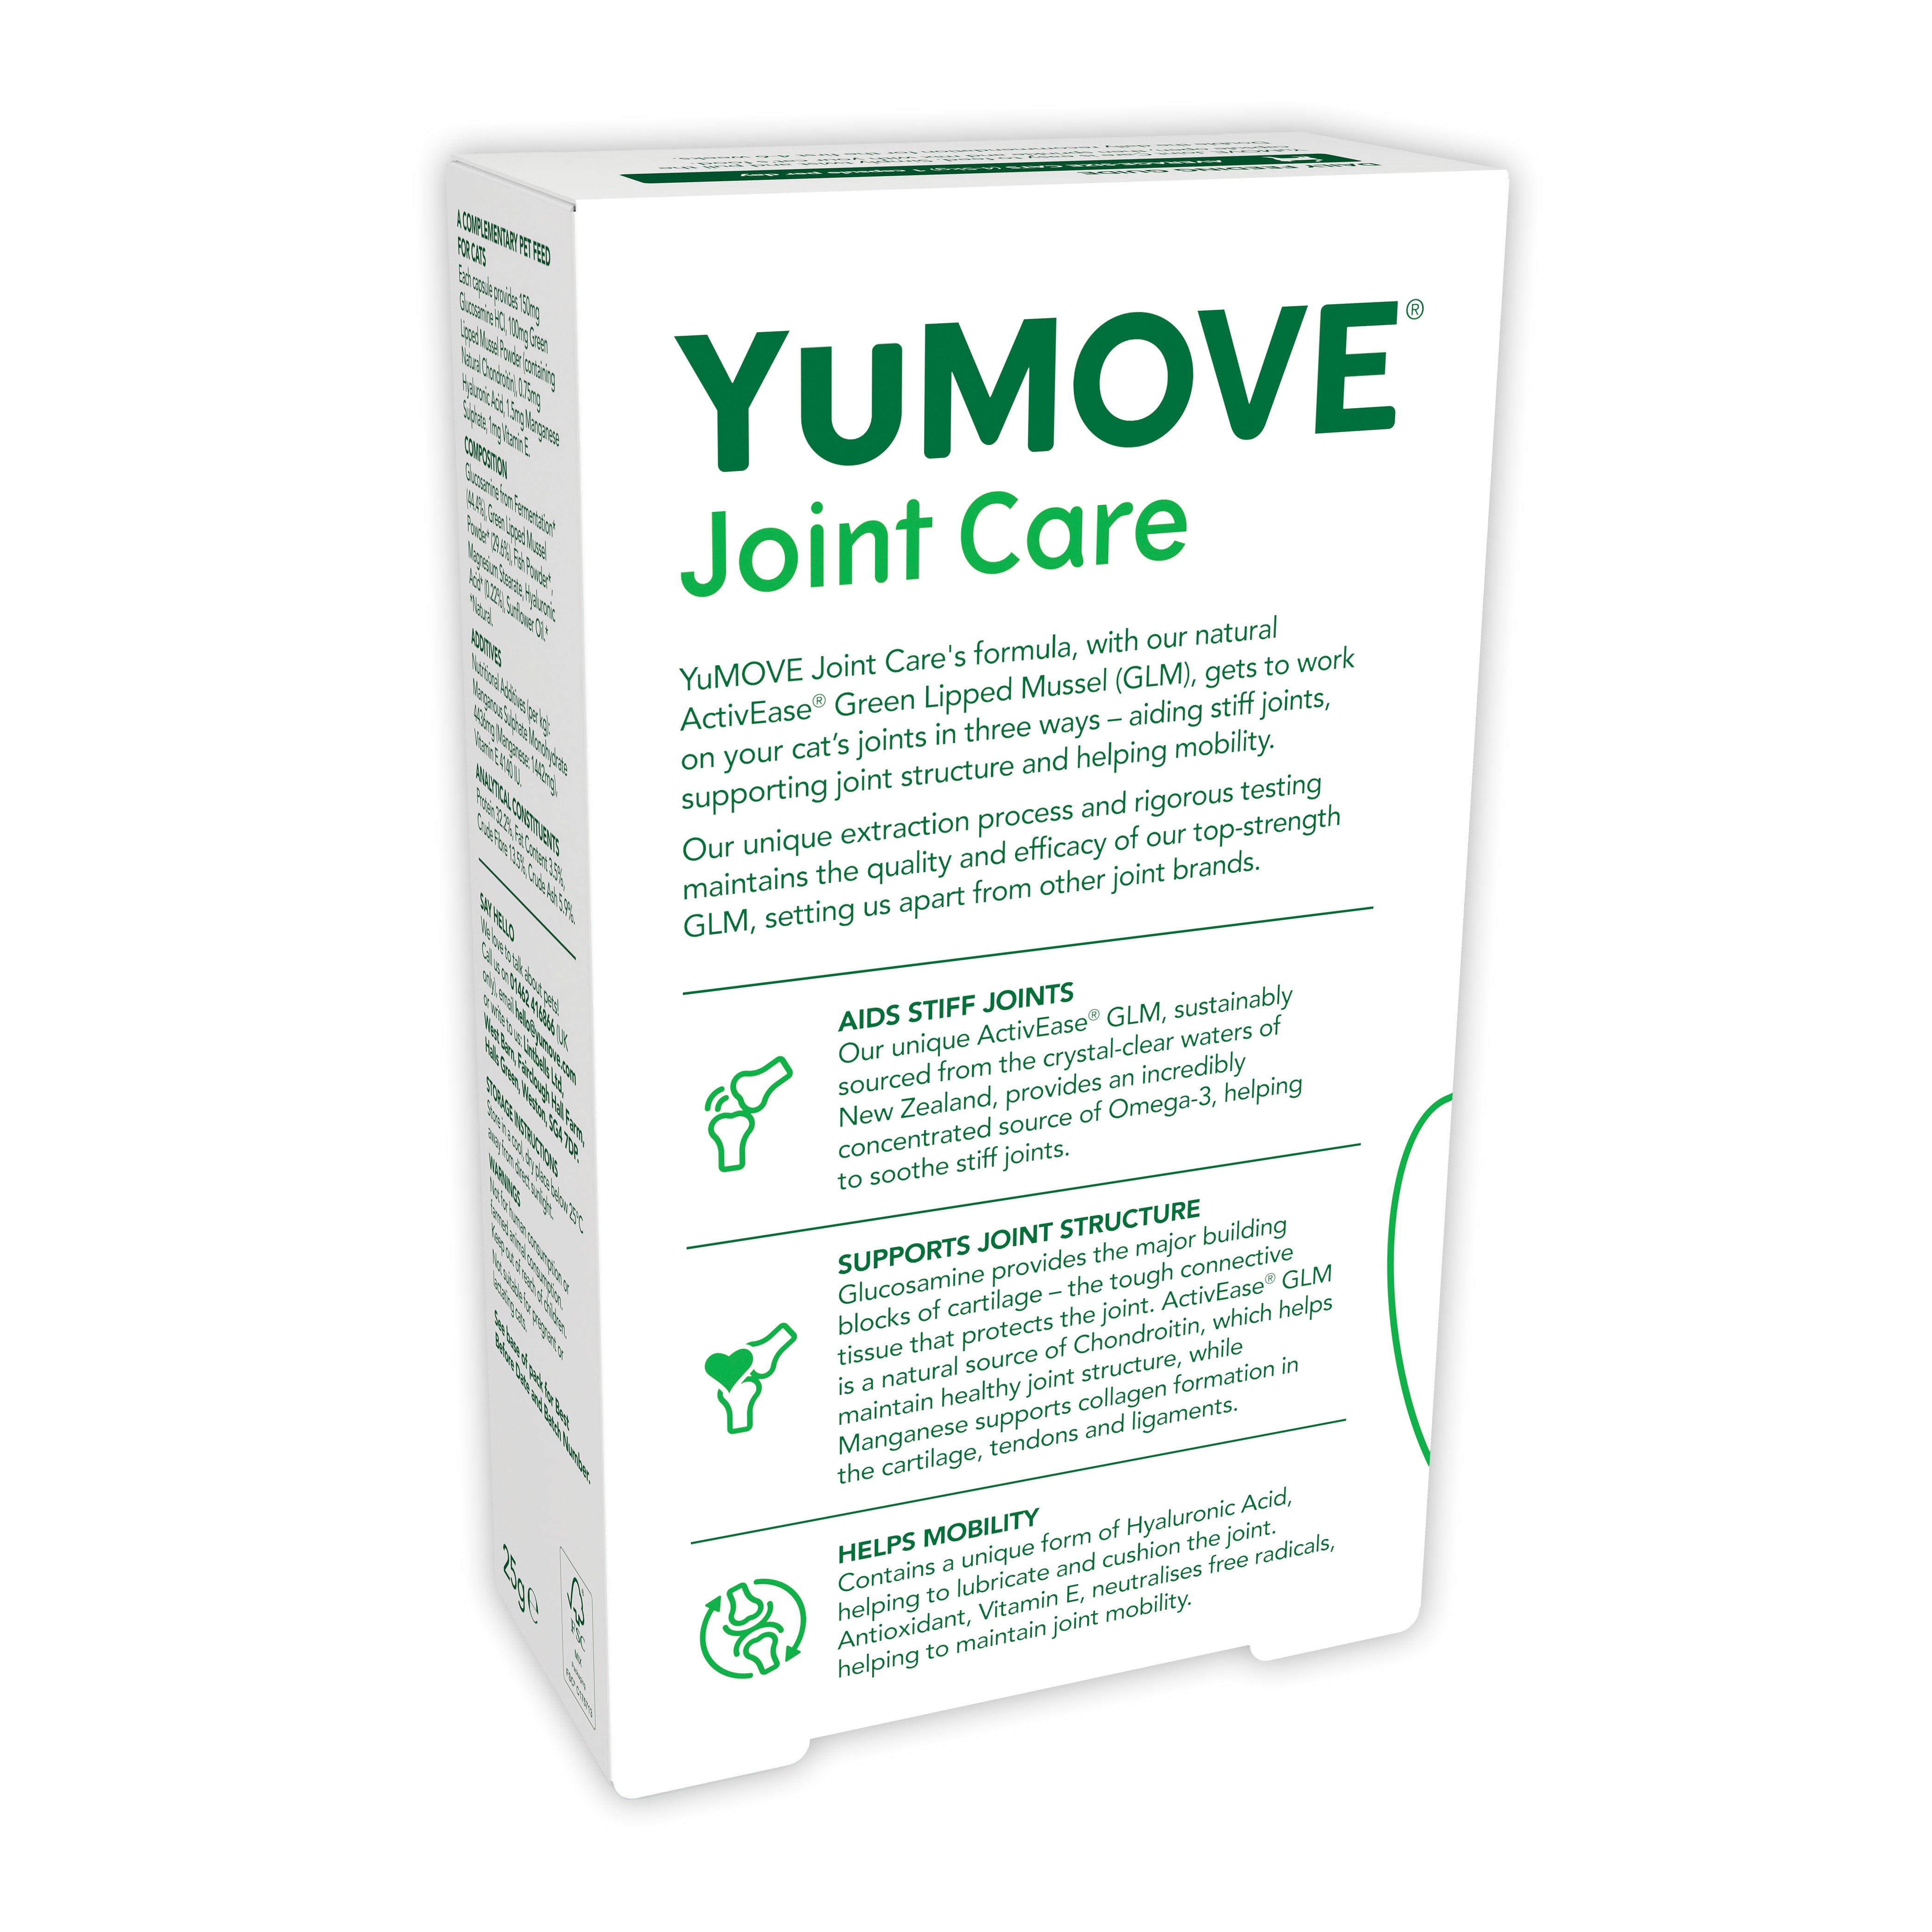 YuMOVE Joint Care for All Cats